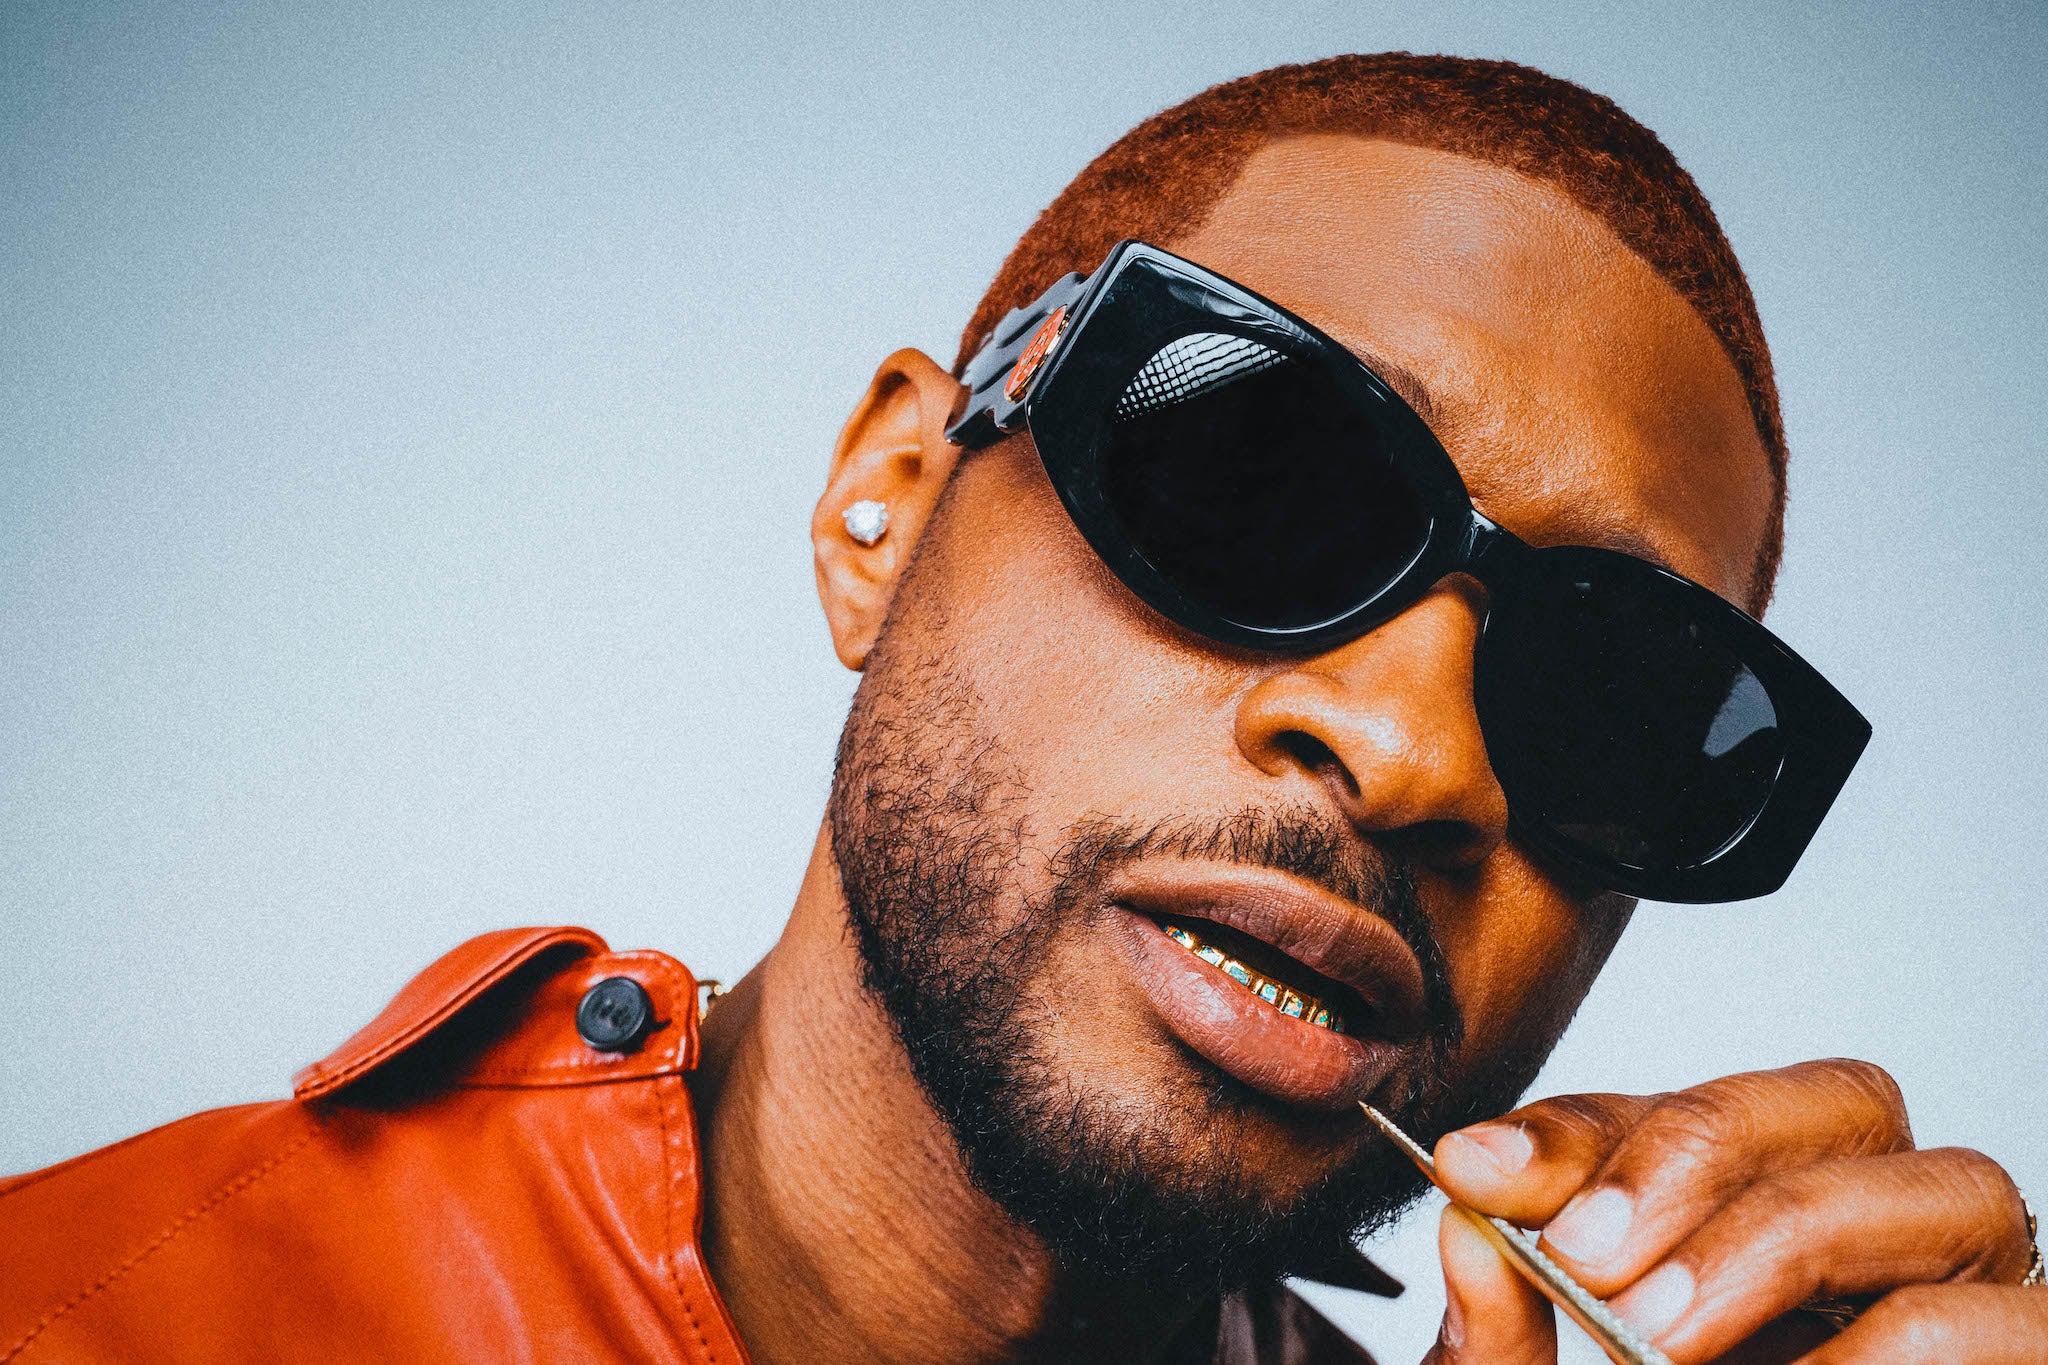 Usher’s new record arrives days ahead of his Super Bowl halftime show